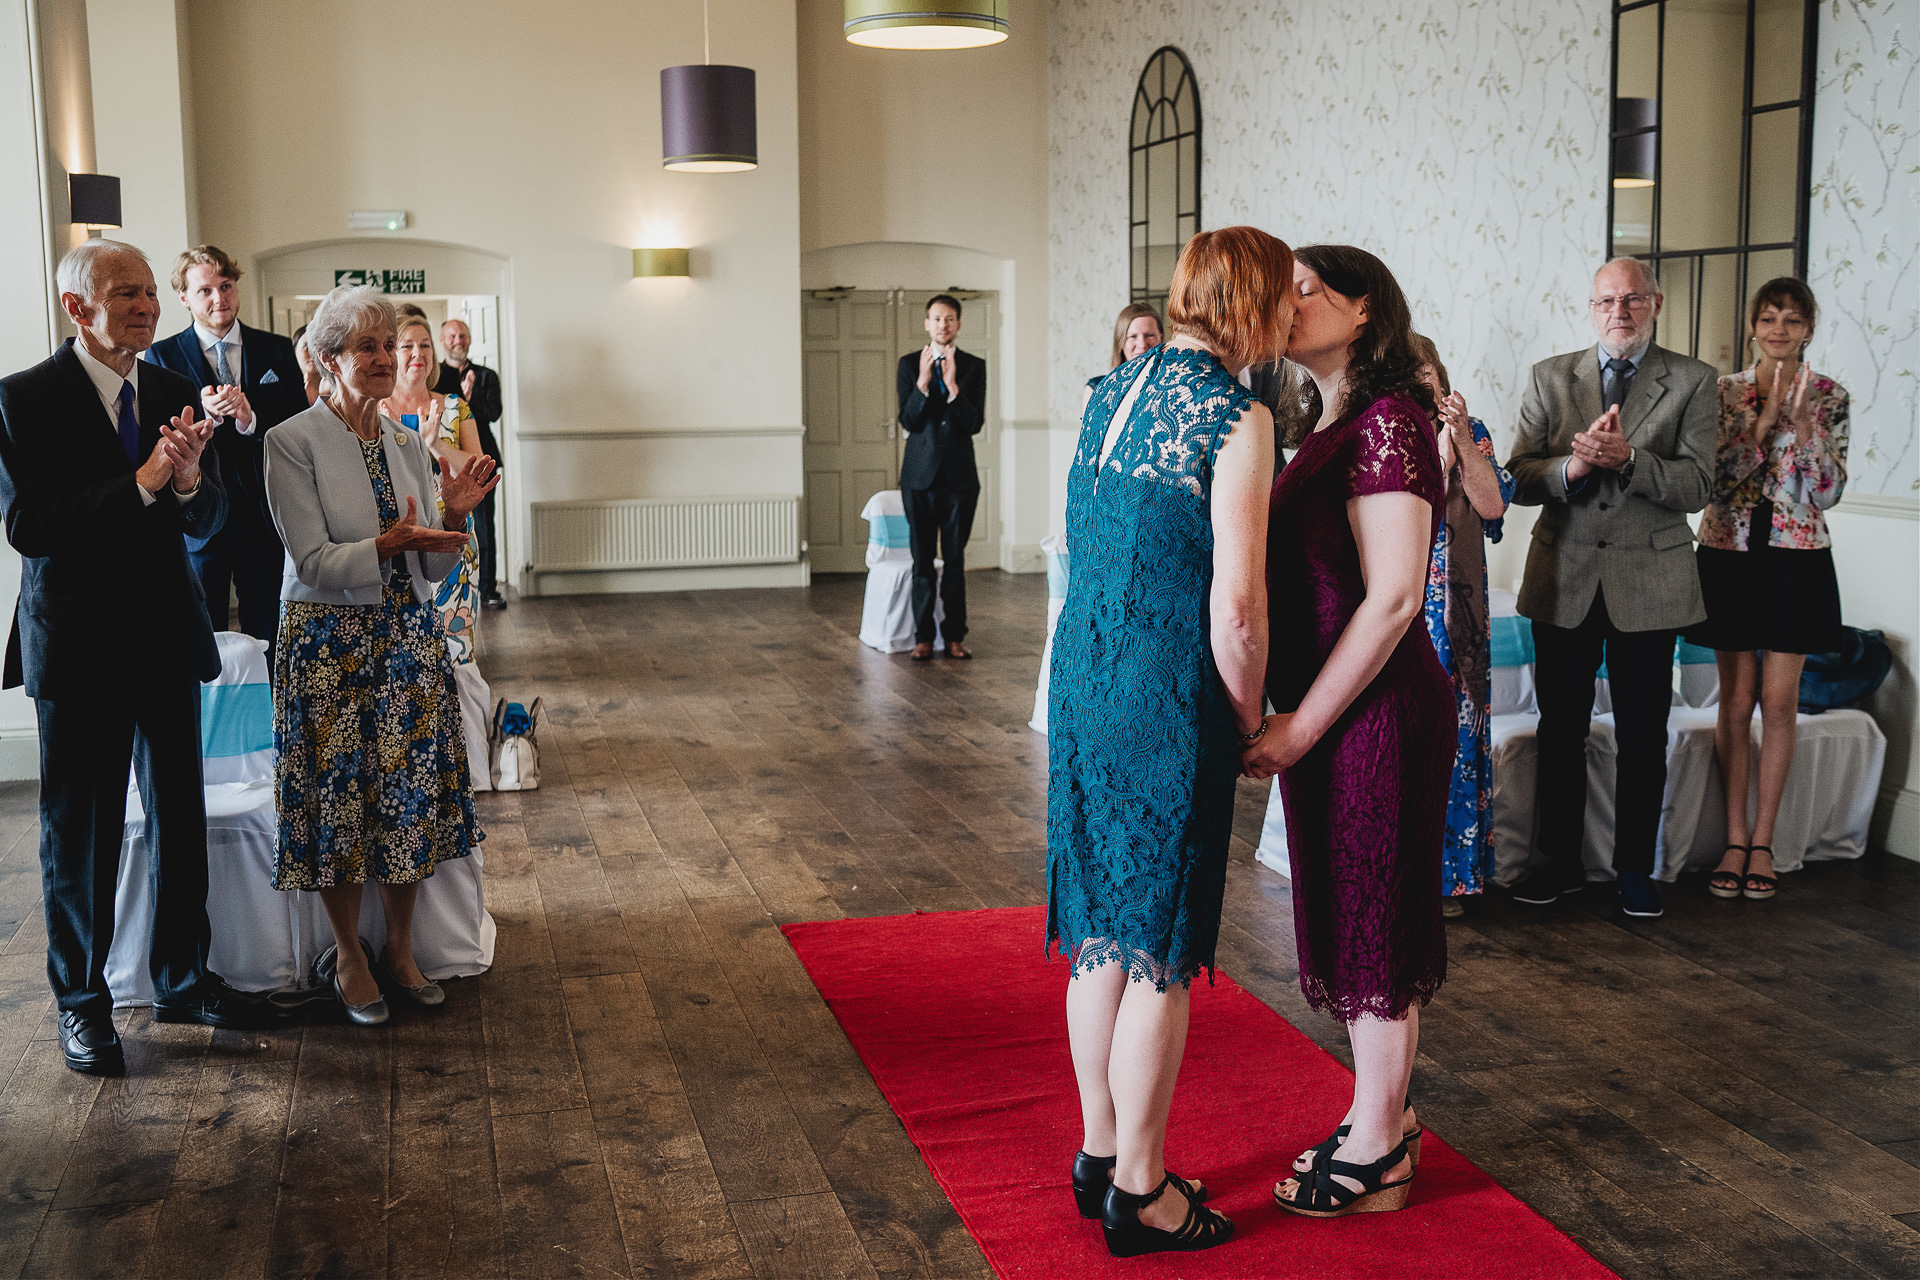 Bride and bride's first kiss during socially distanced ceremony